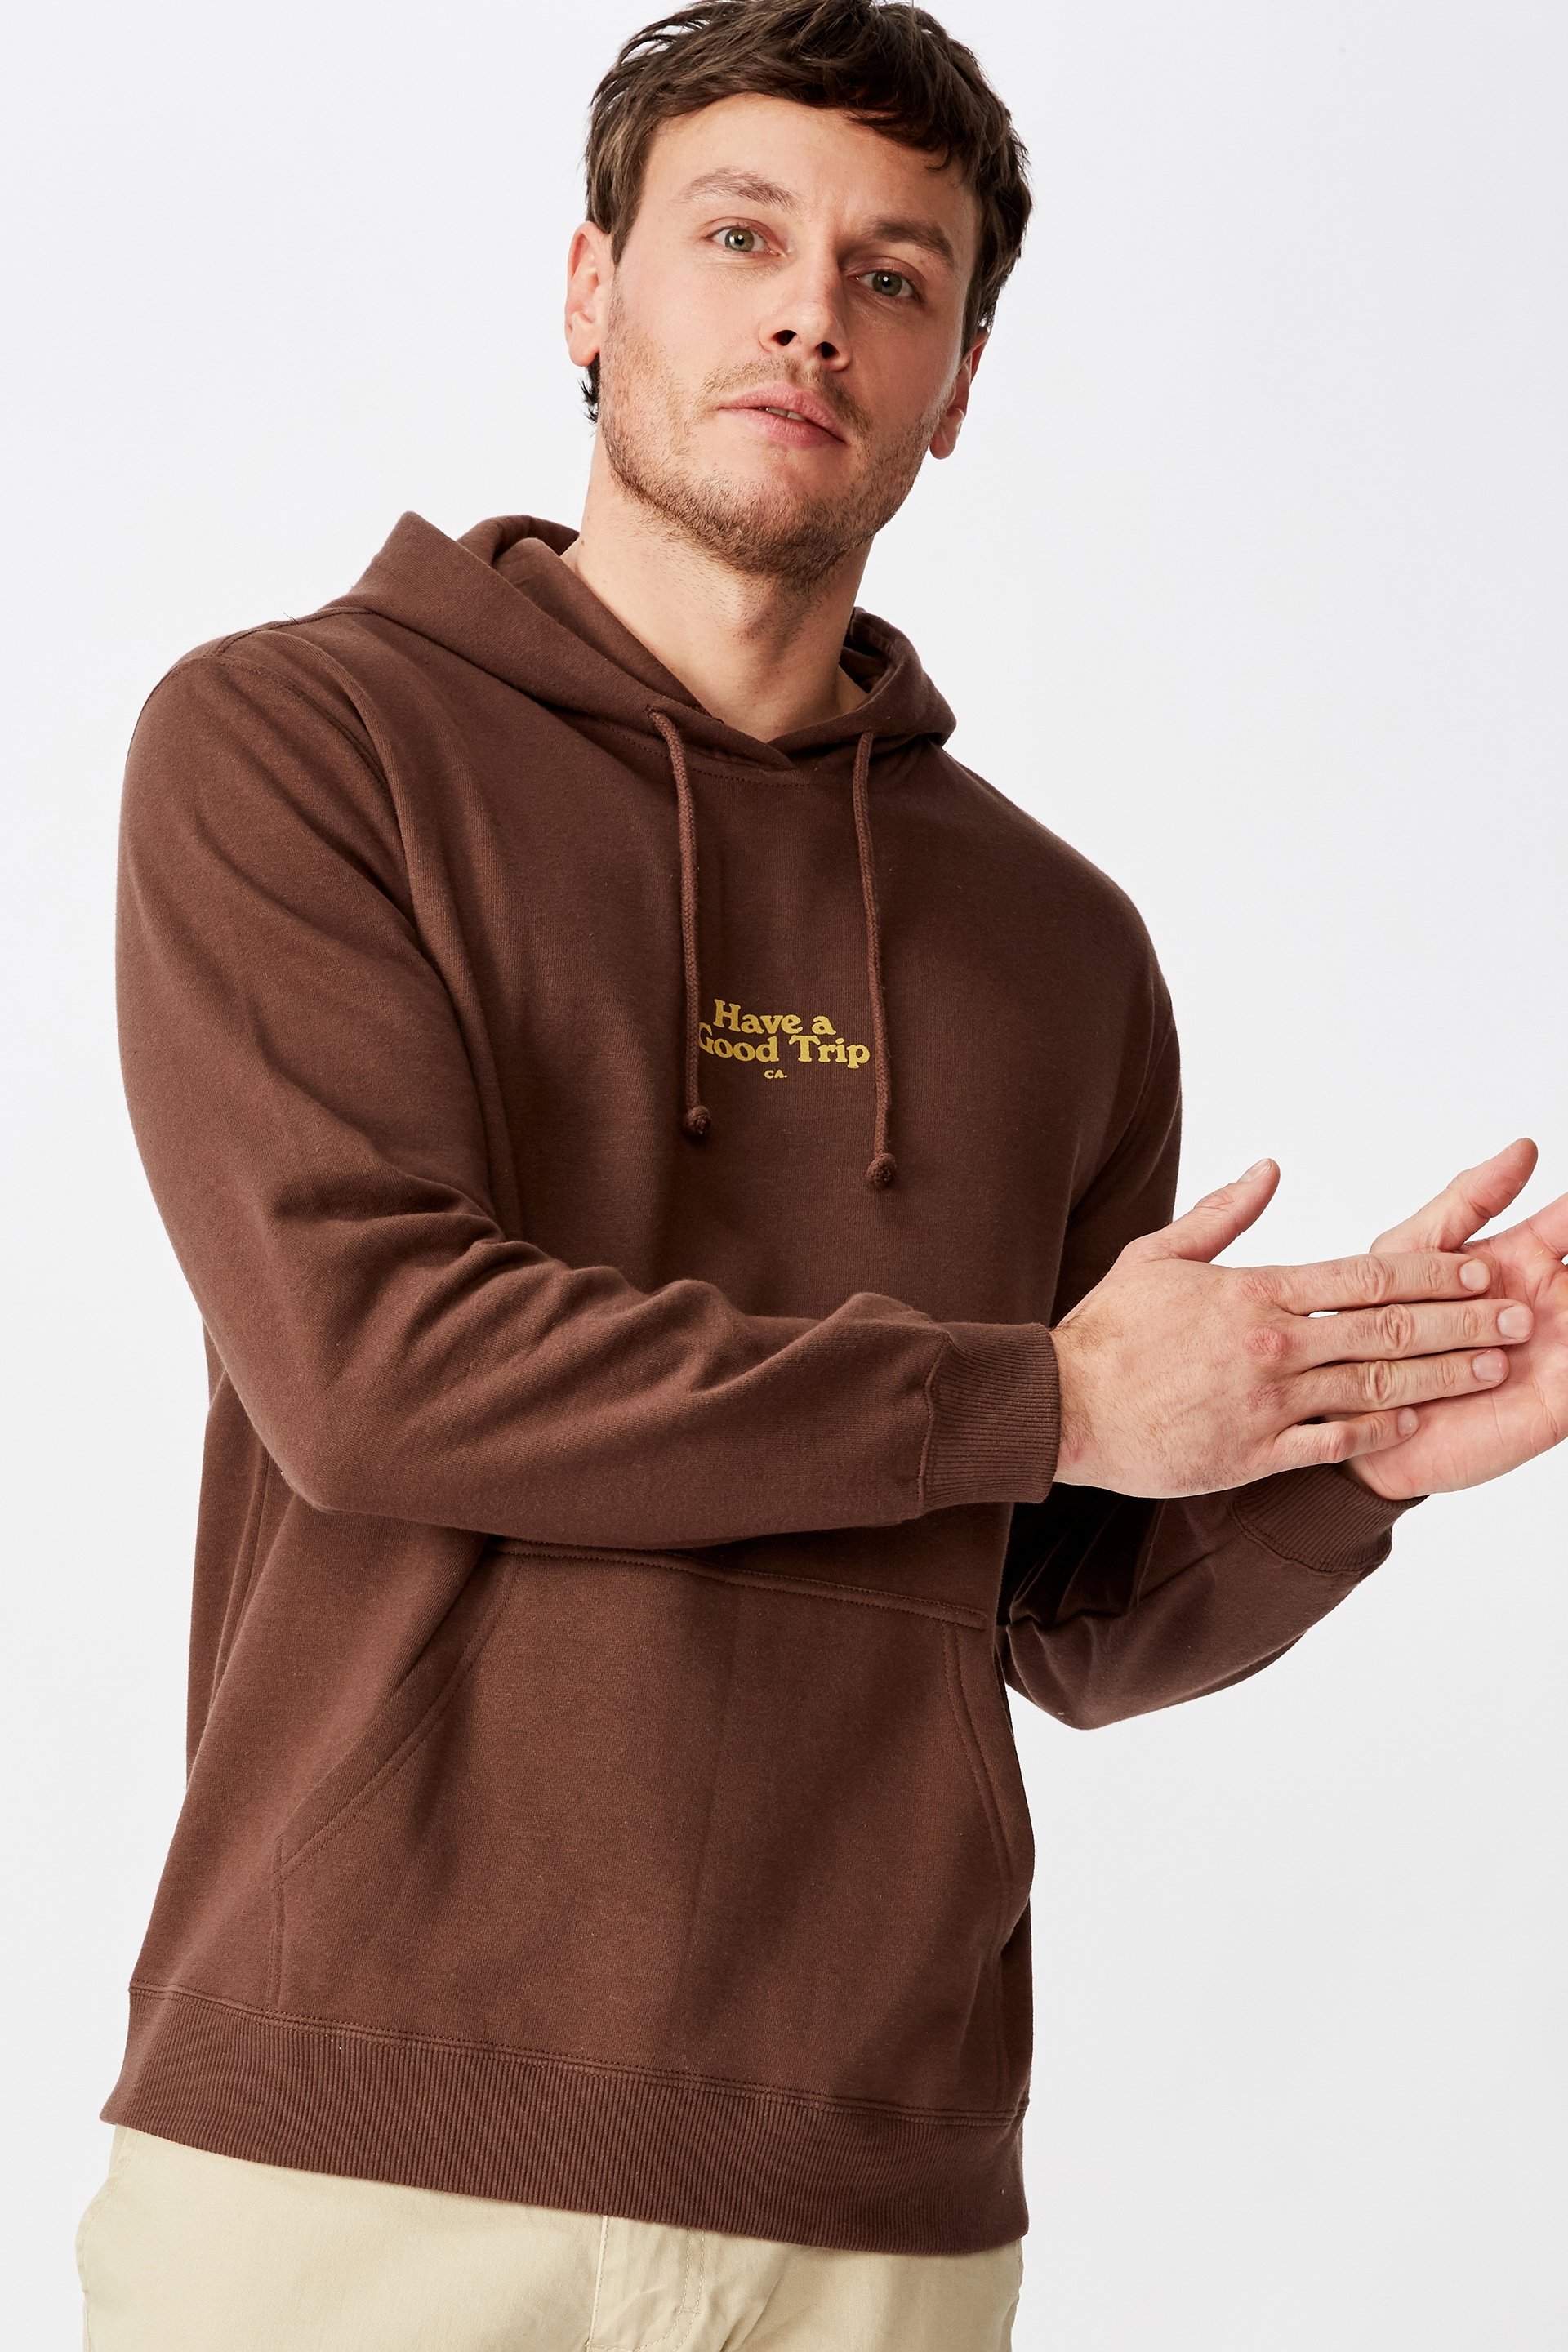 Cotton On Men - Fleece Pullover 2 - Chocolate brown/have a good trip